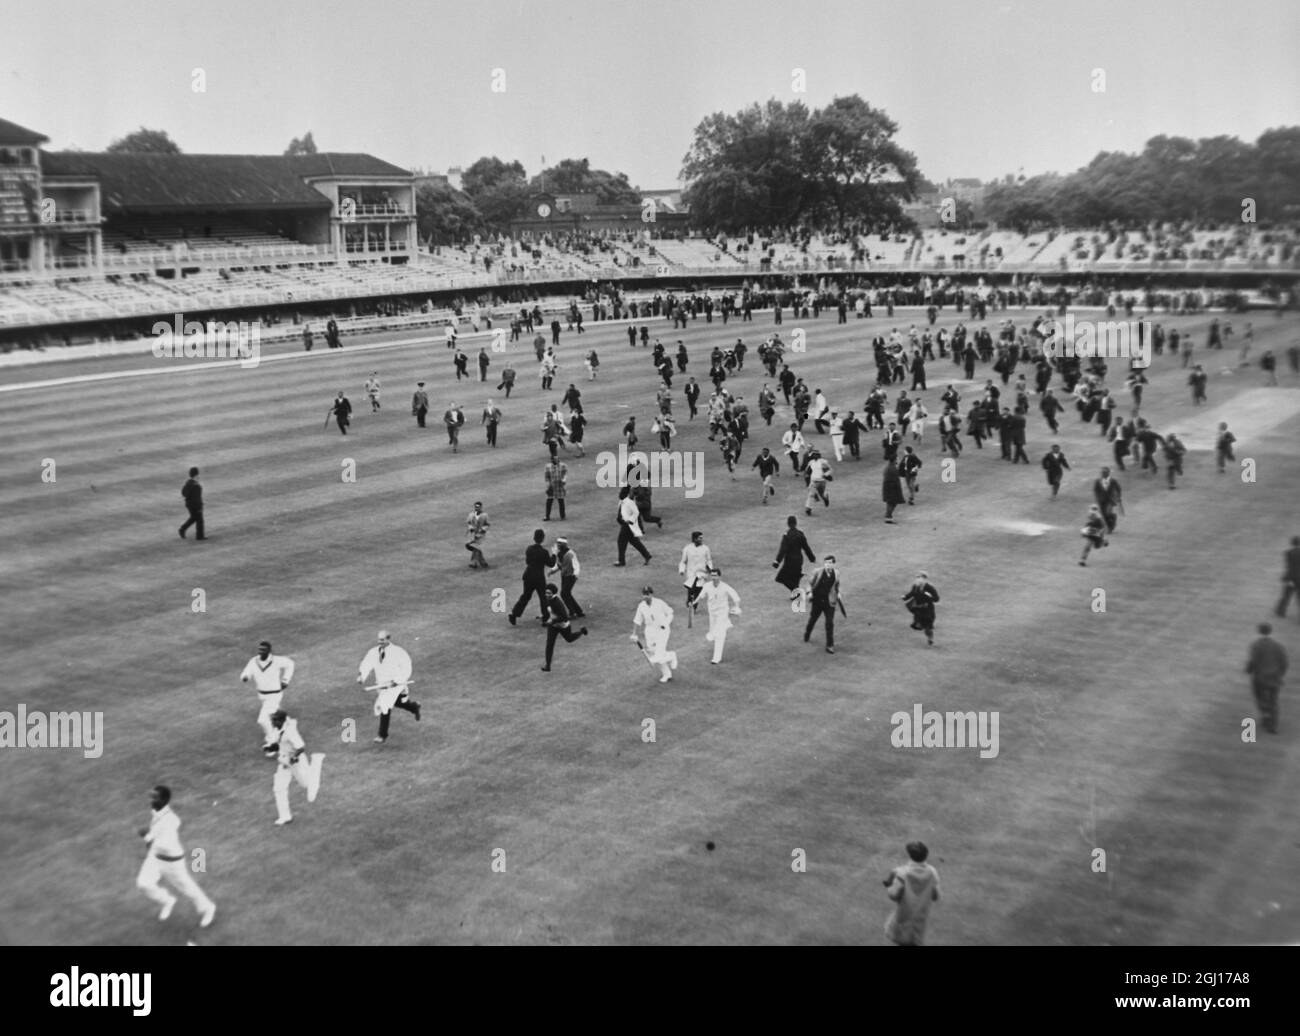 ENGLAND V WEST INDIES SCORE IS DRAW AT LORDS CRICKET GOUNDS IN LONDON; 26 JUNE 1963 Stock Photo